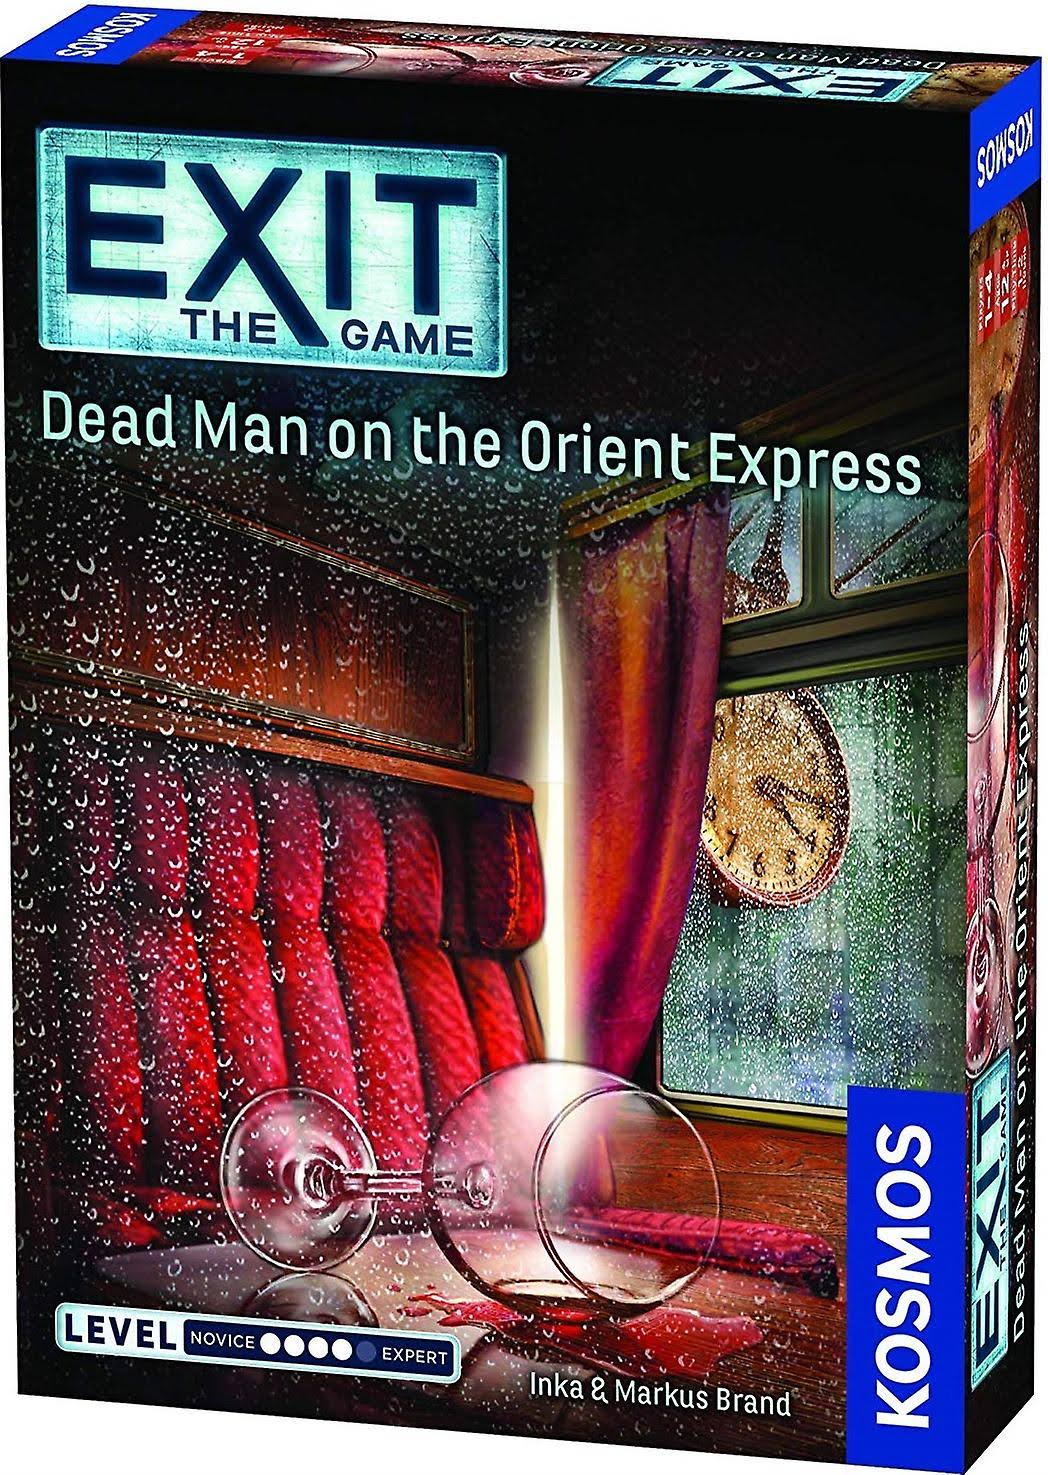 Exit The Game - The Dead Man on the Orient Express